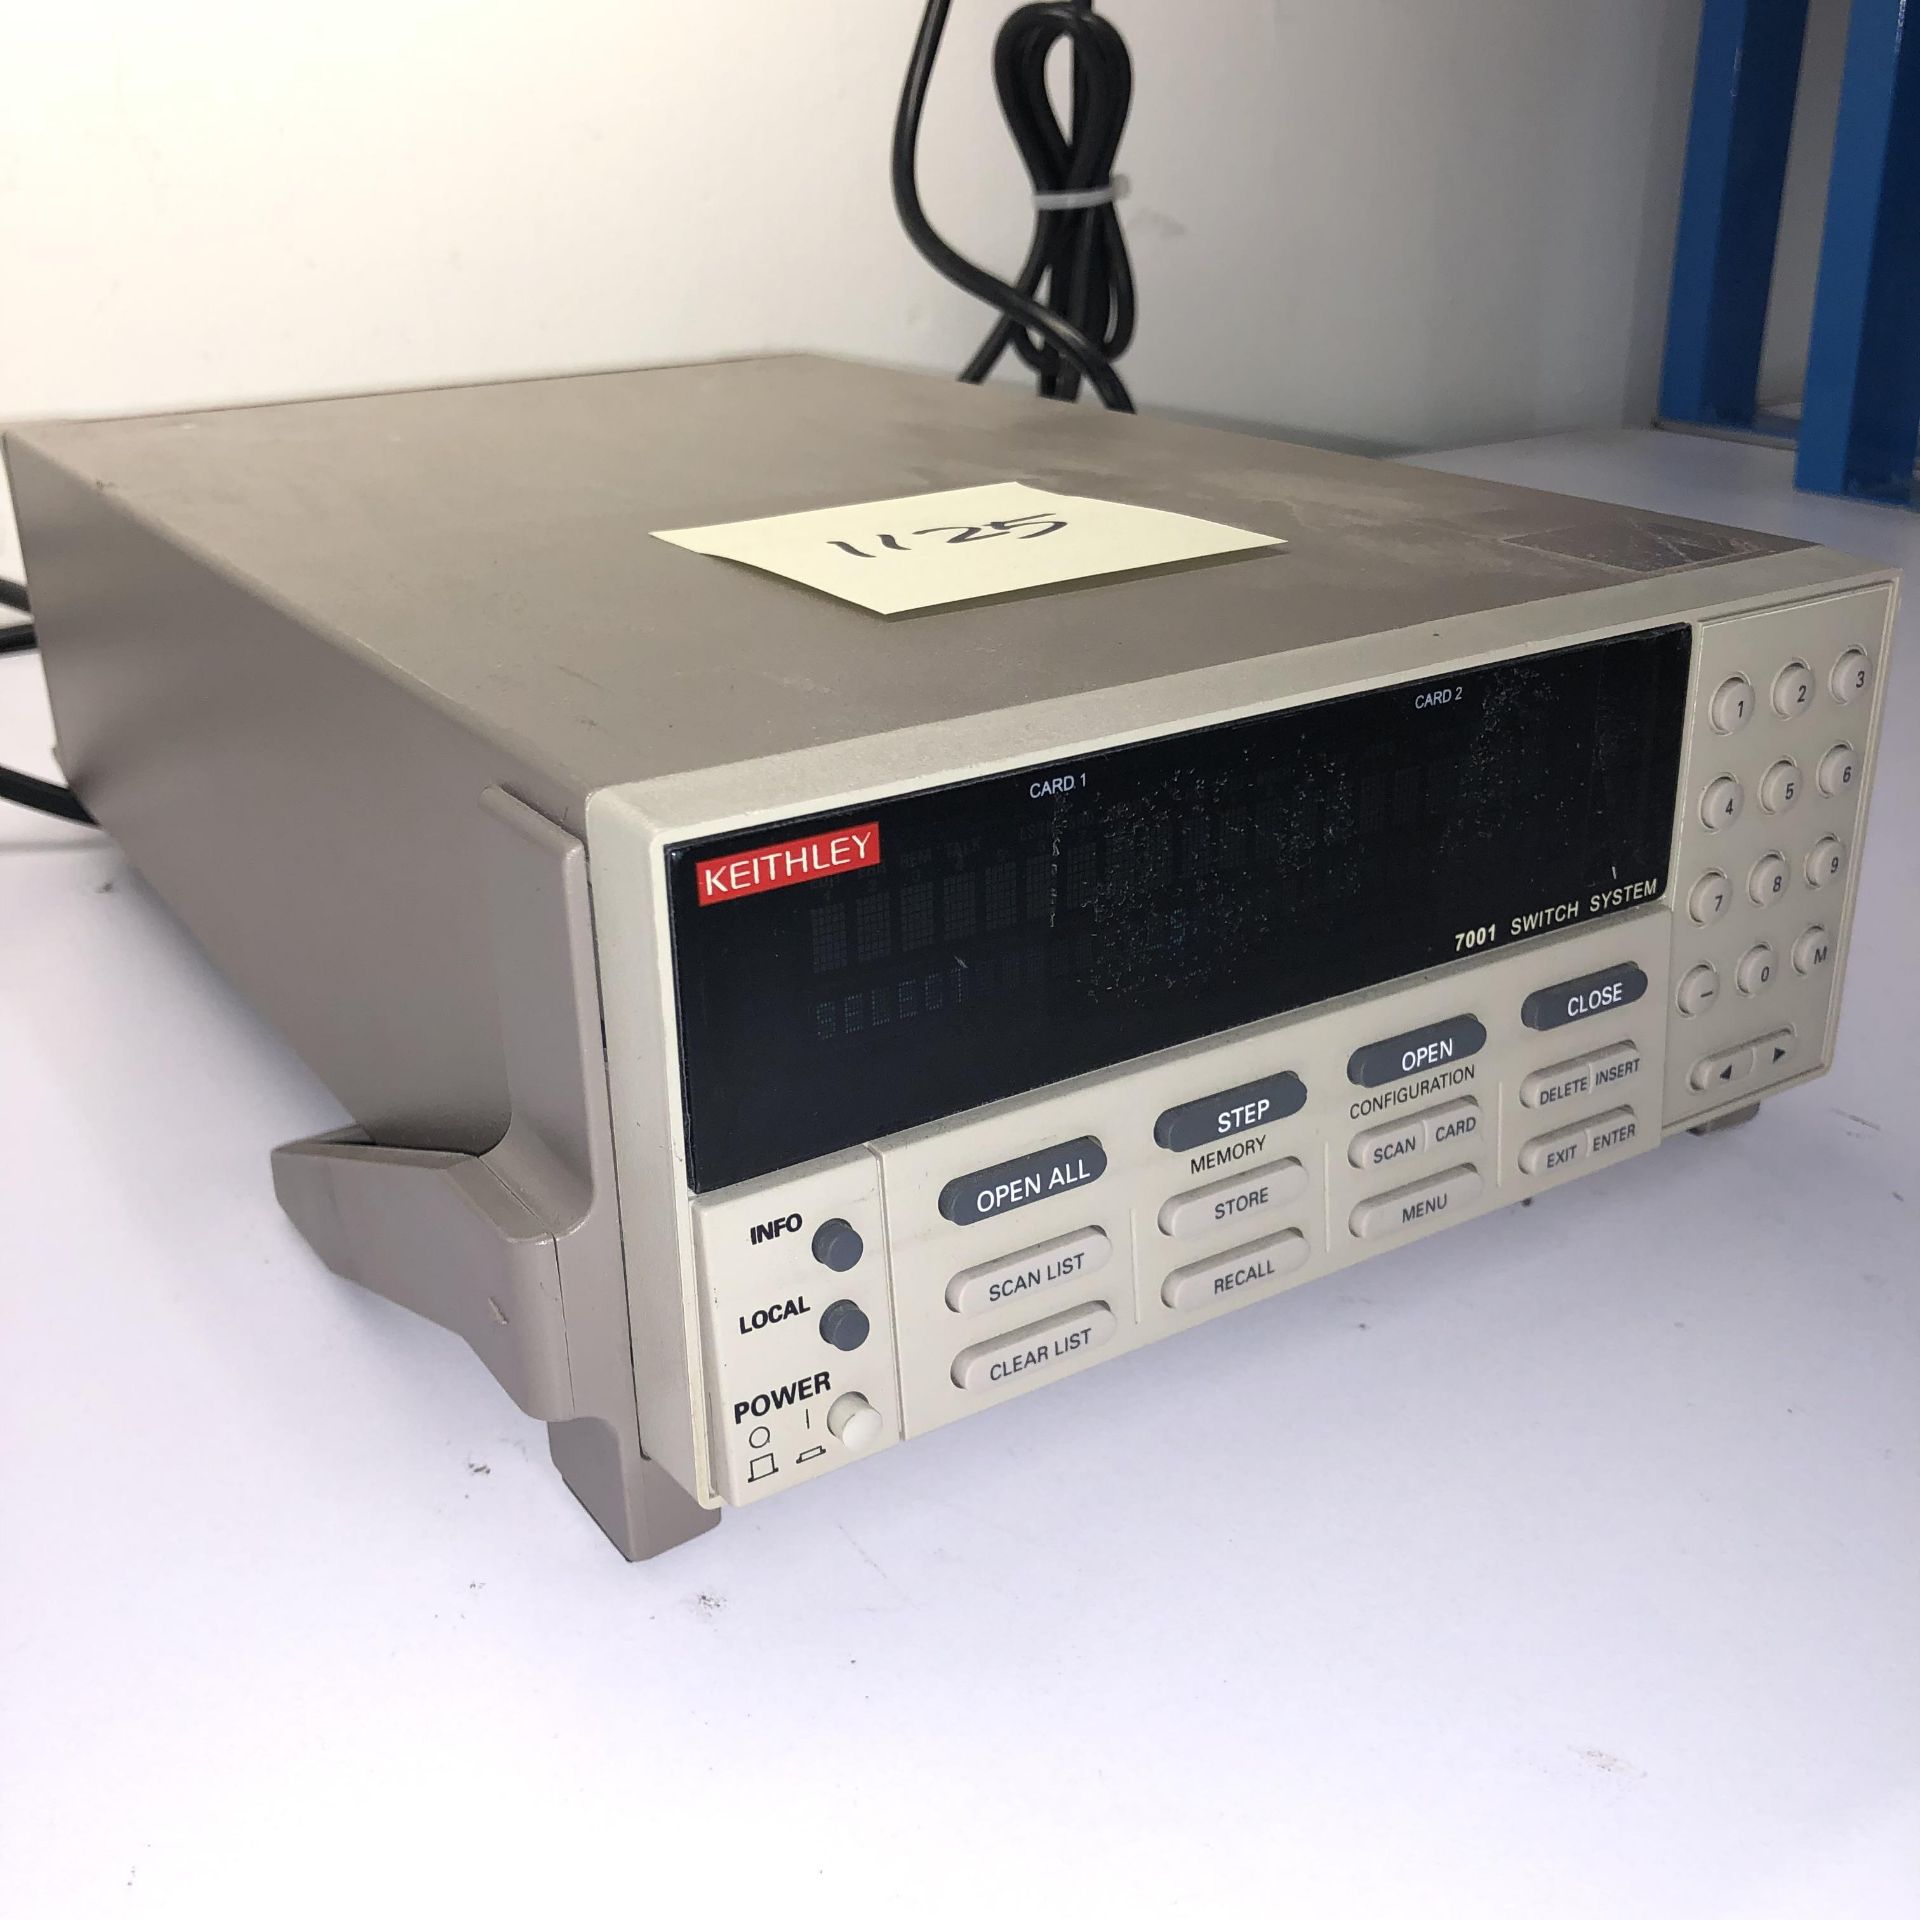 KEITHLEY 7001 SWITCH SYSTEM   1218 Alderwood Ave Sunnyvale, California - Image 2 of 6